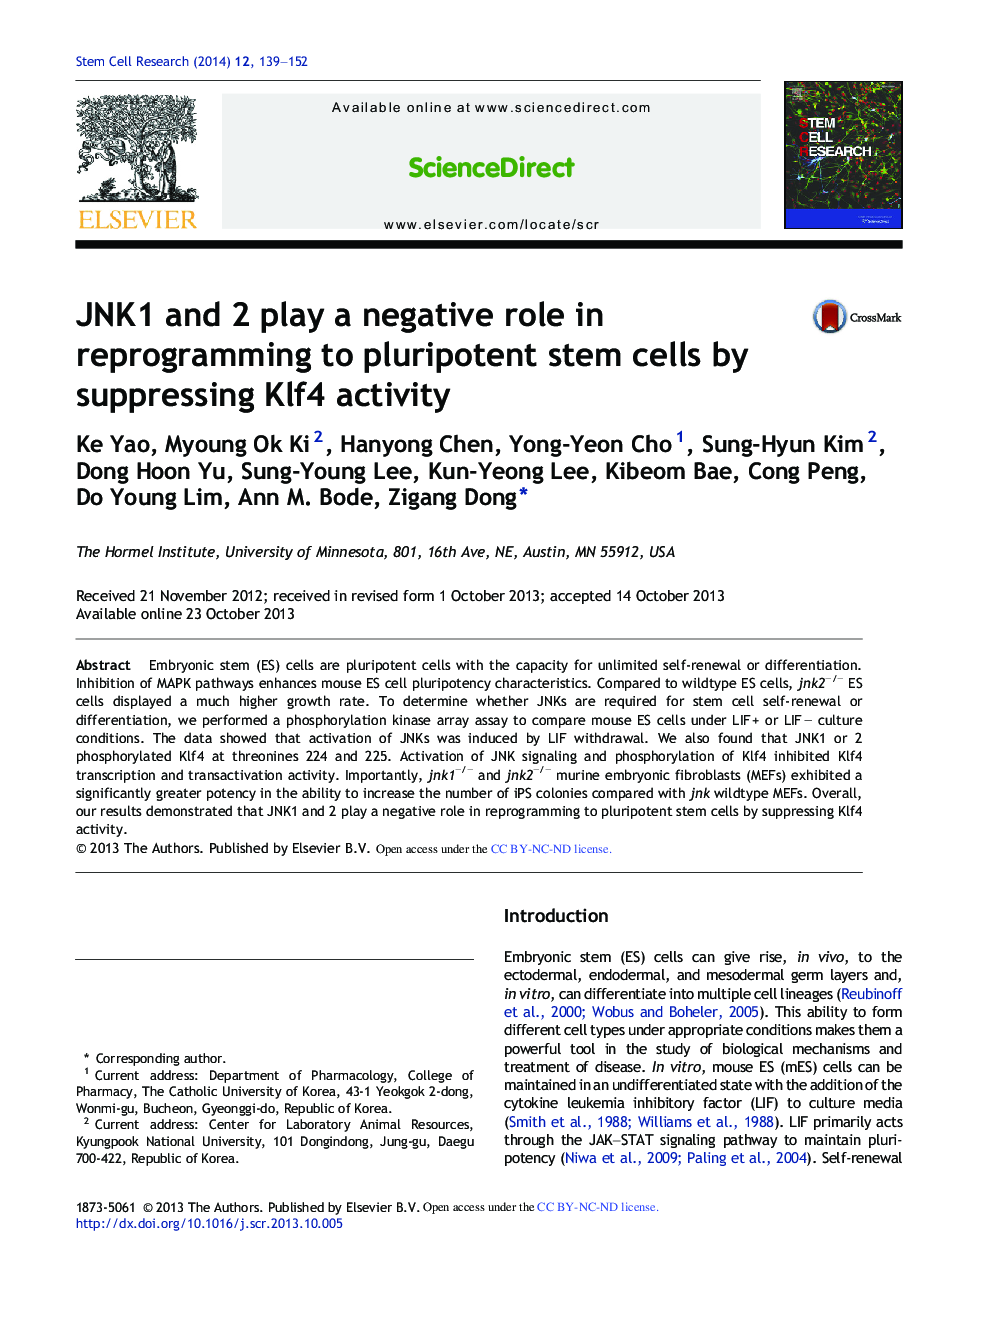 JNK1 and 2 play a negative role in reprogramming to pluripotent stem cells by suppressing Klf4 activity